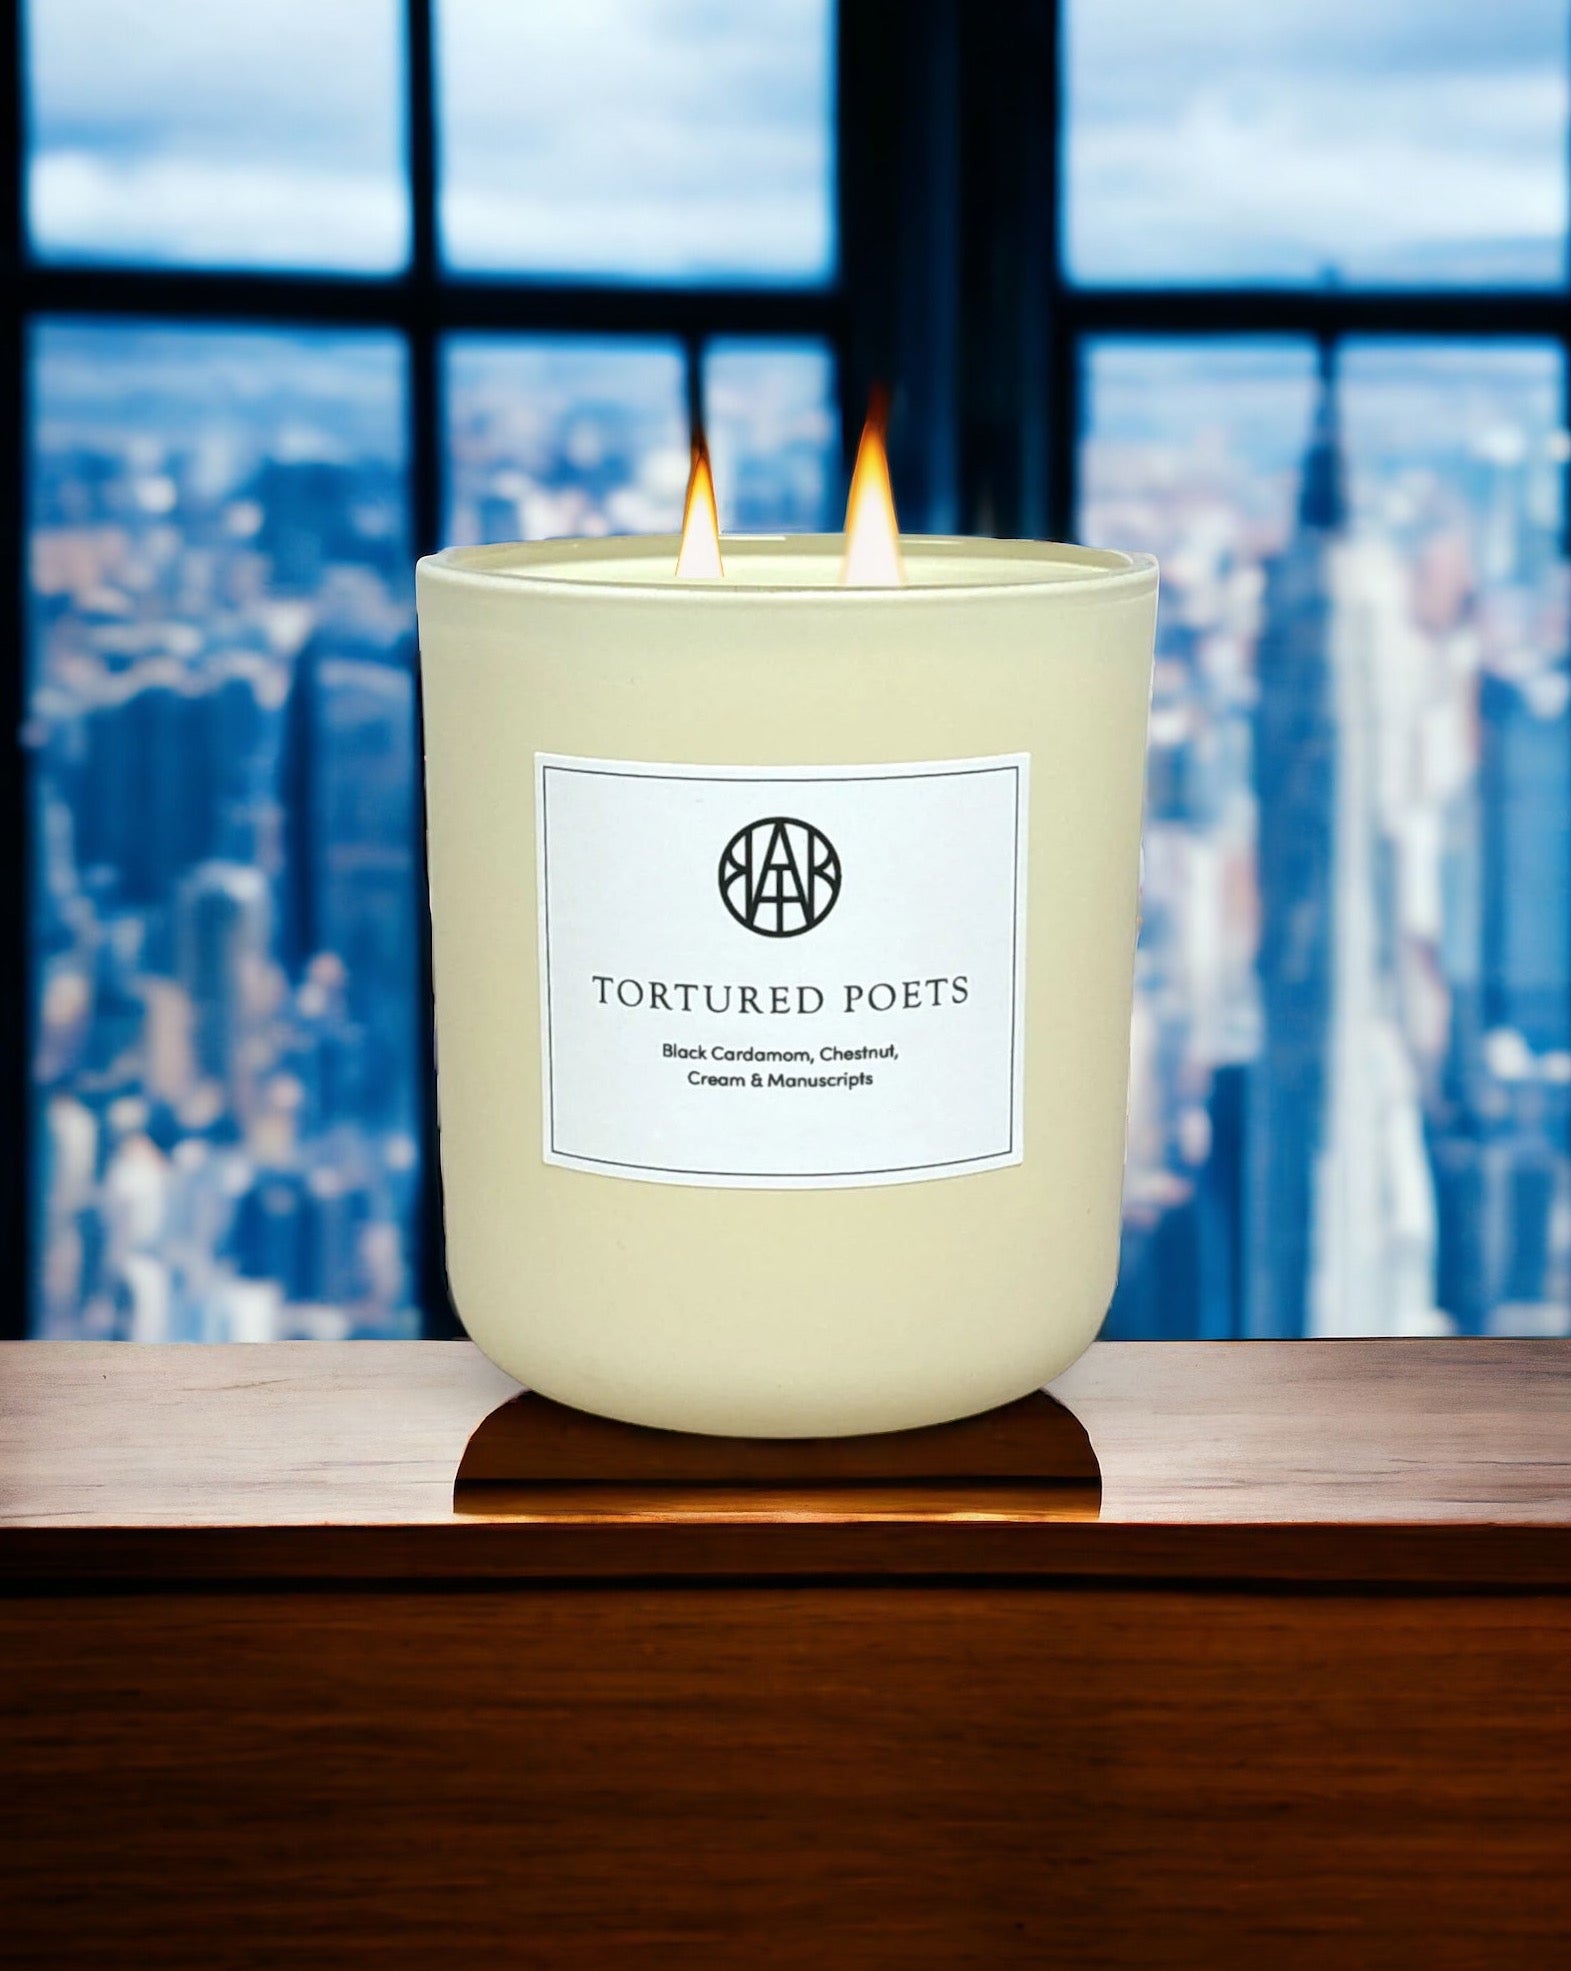 TORTURED POETS - Deluxe Candle - AEMBR - Clean Luxury Candles, Wax Melts & Laundry Care